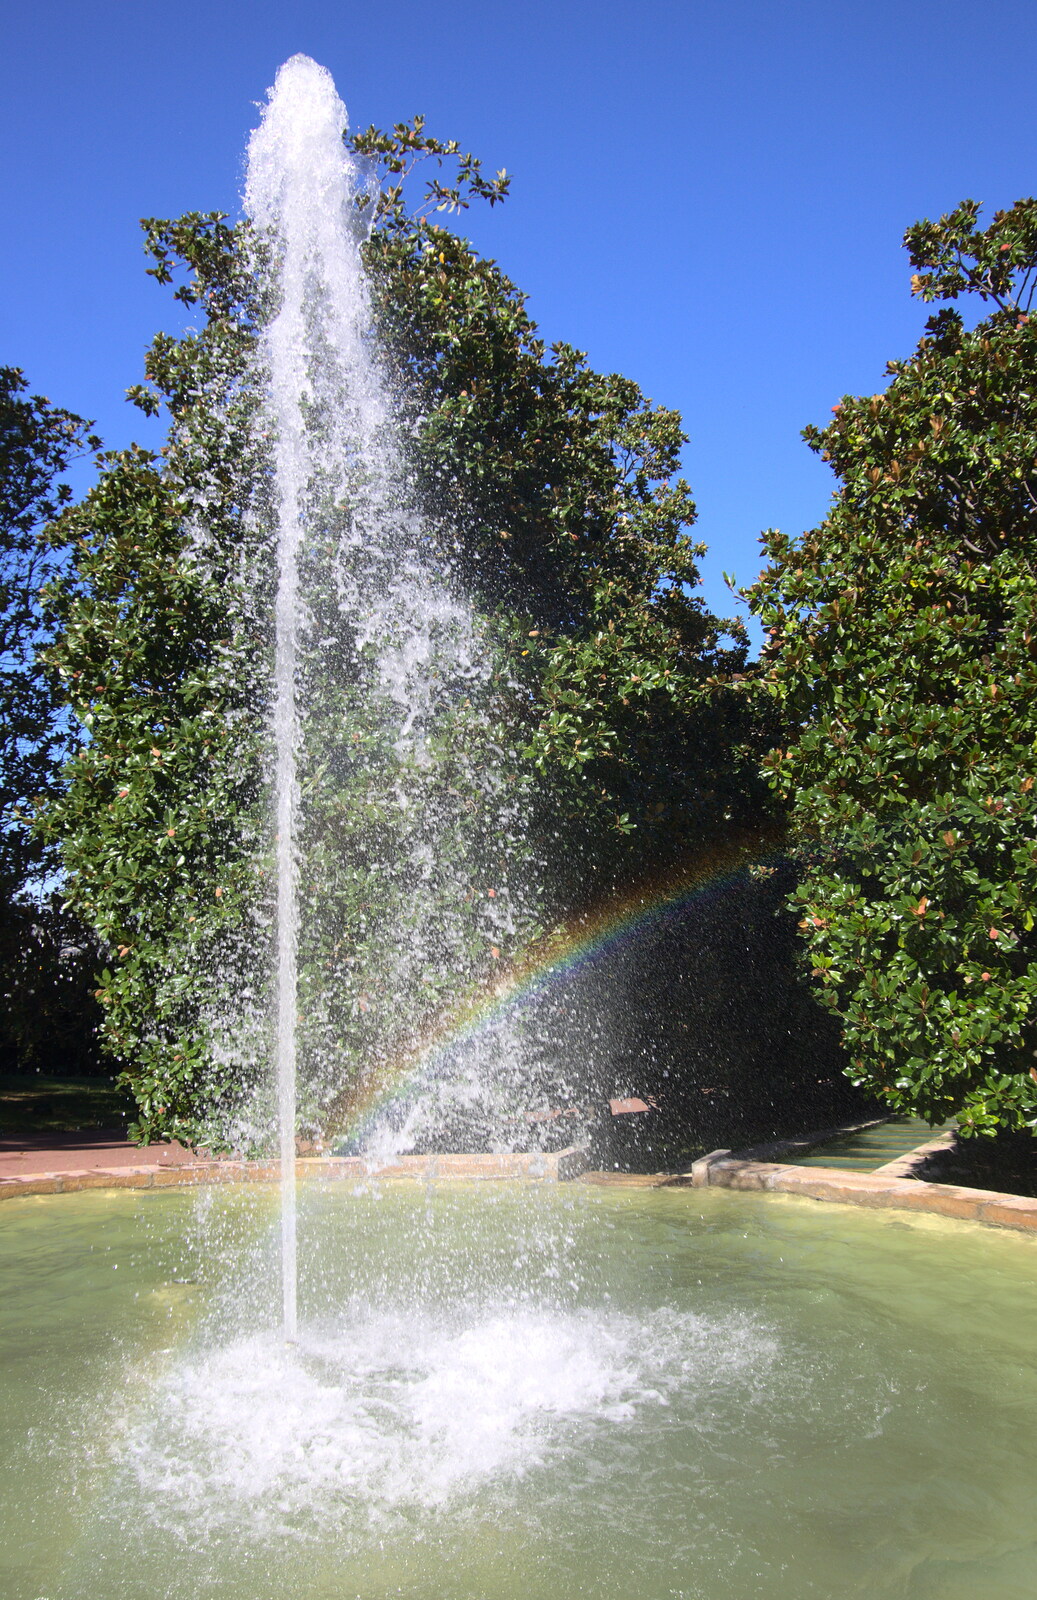 We spot a rainbow in the fountain spray from Barcelona and Parc Montjuïc, Catalonia, Spain - 21st October 2017